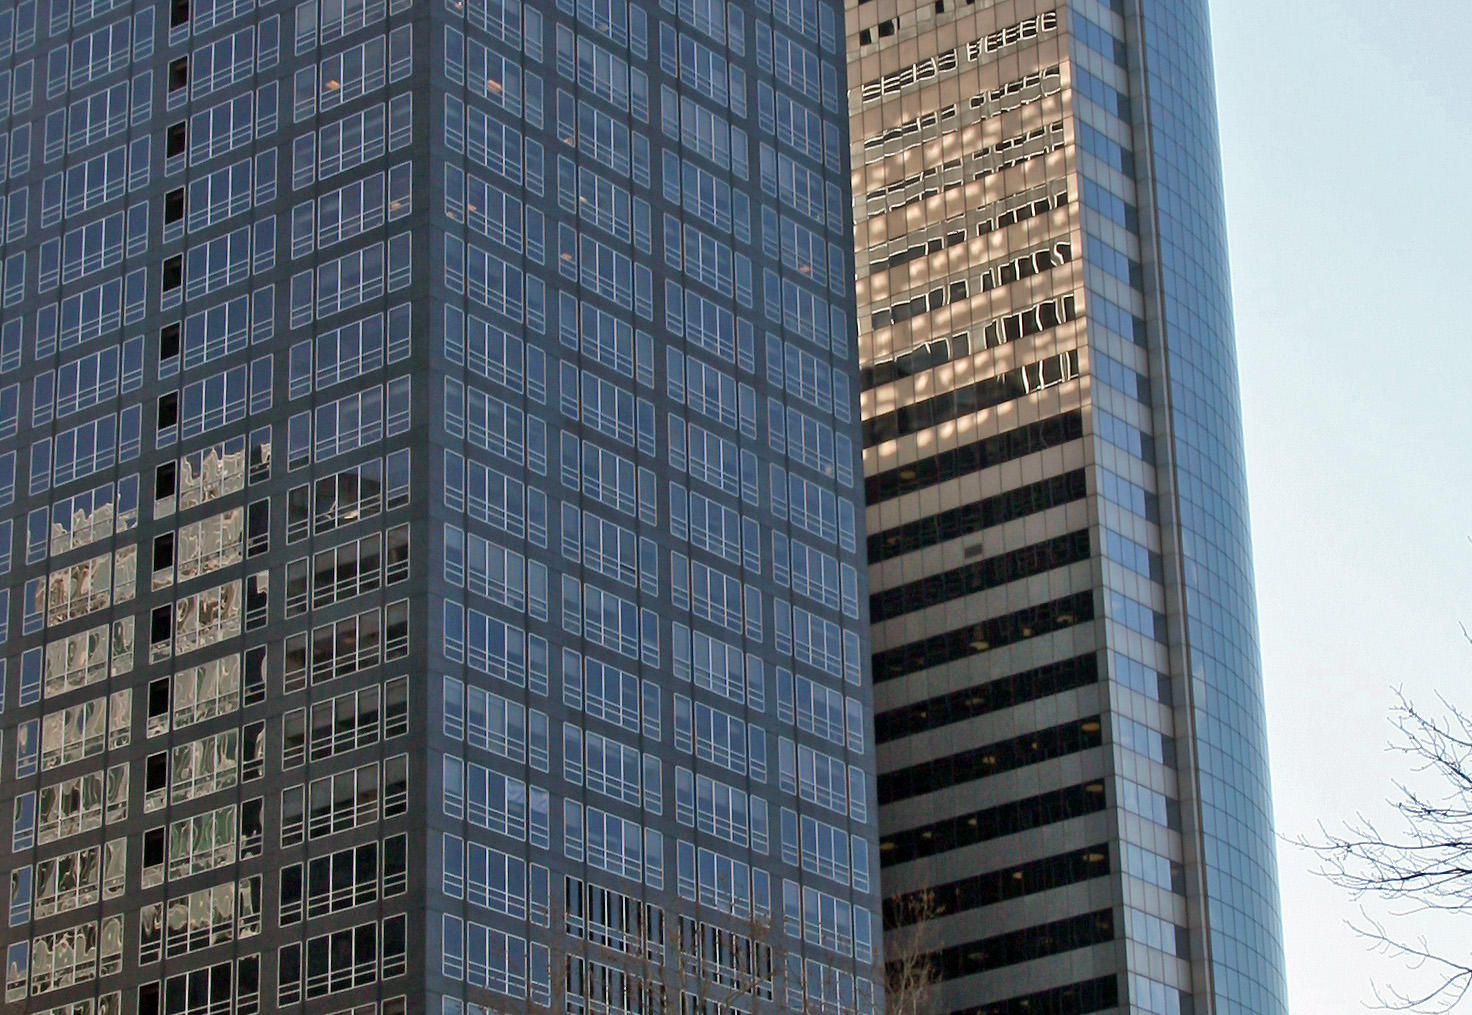 Sunrise Building Reflections - Financial District